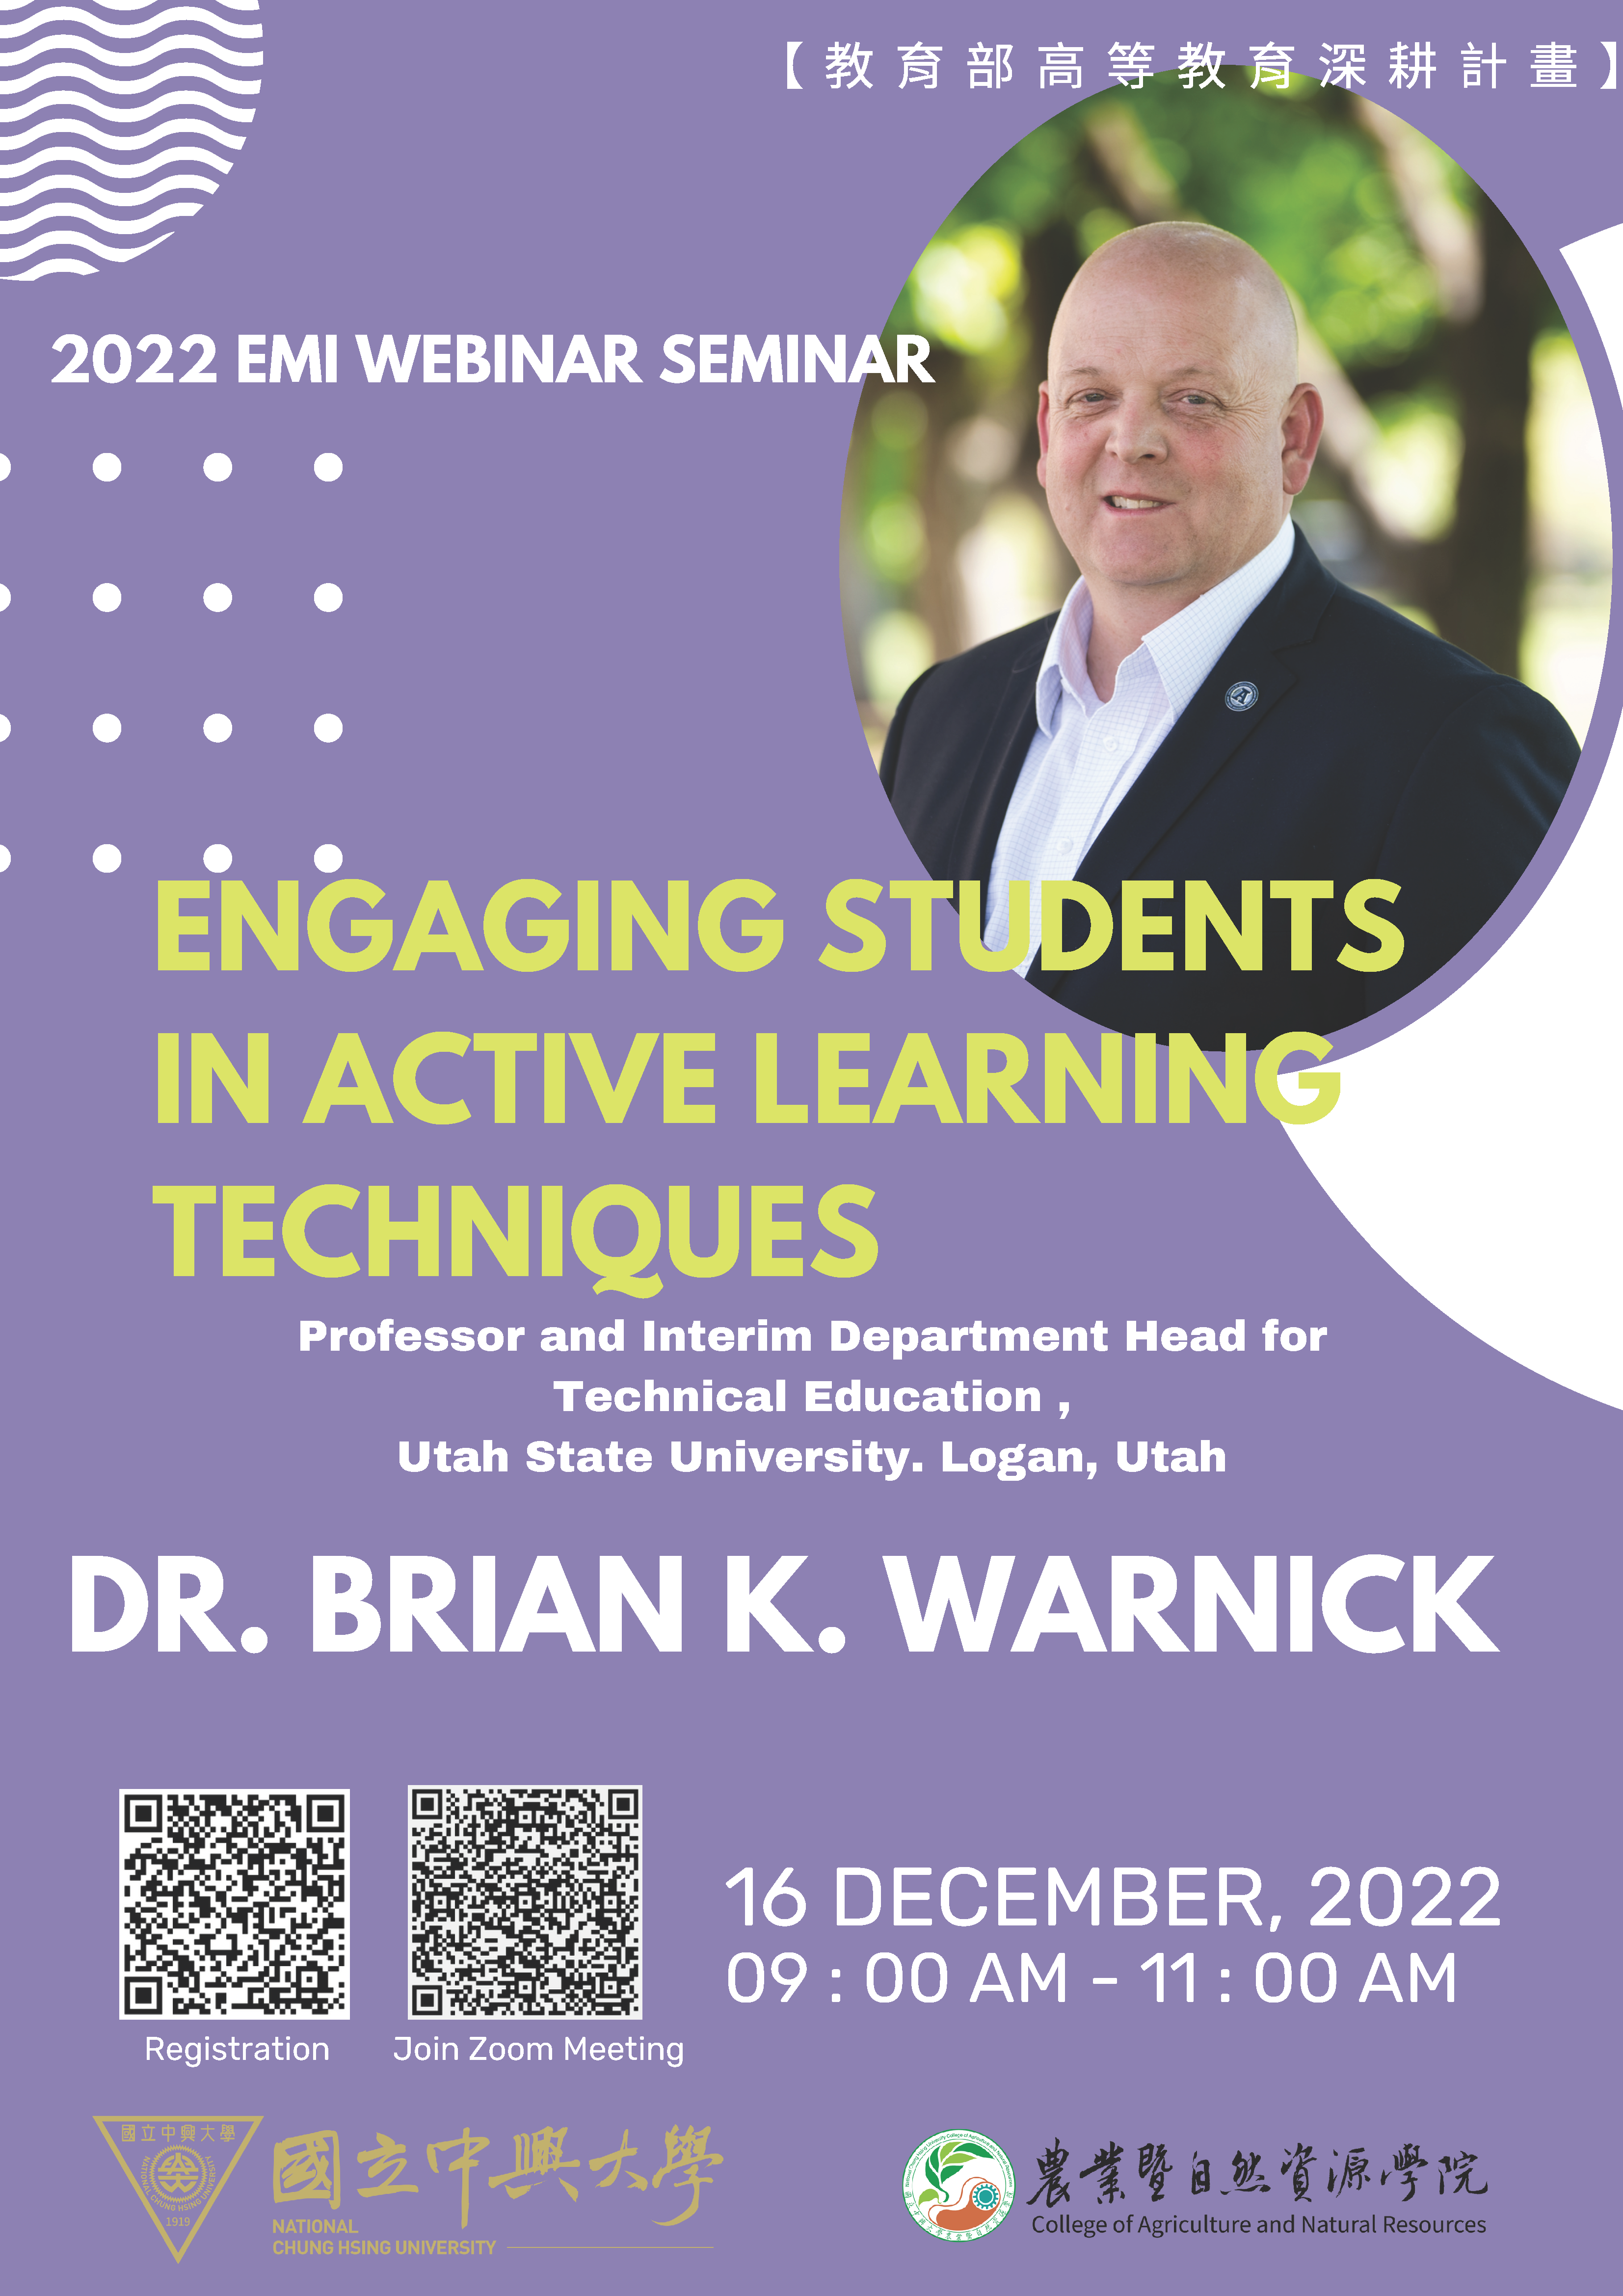 【2022 EMI webinar seminar_12/16(五)9:00-11:00AM】USU Dr. Brian K. Warnick: Engaging students in active learning techniques